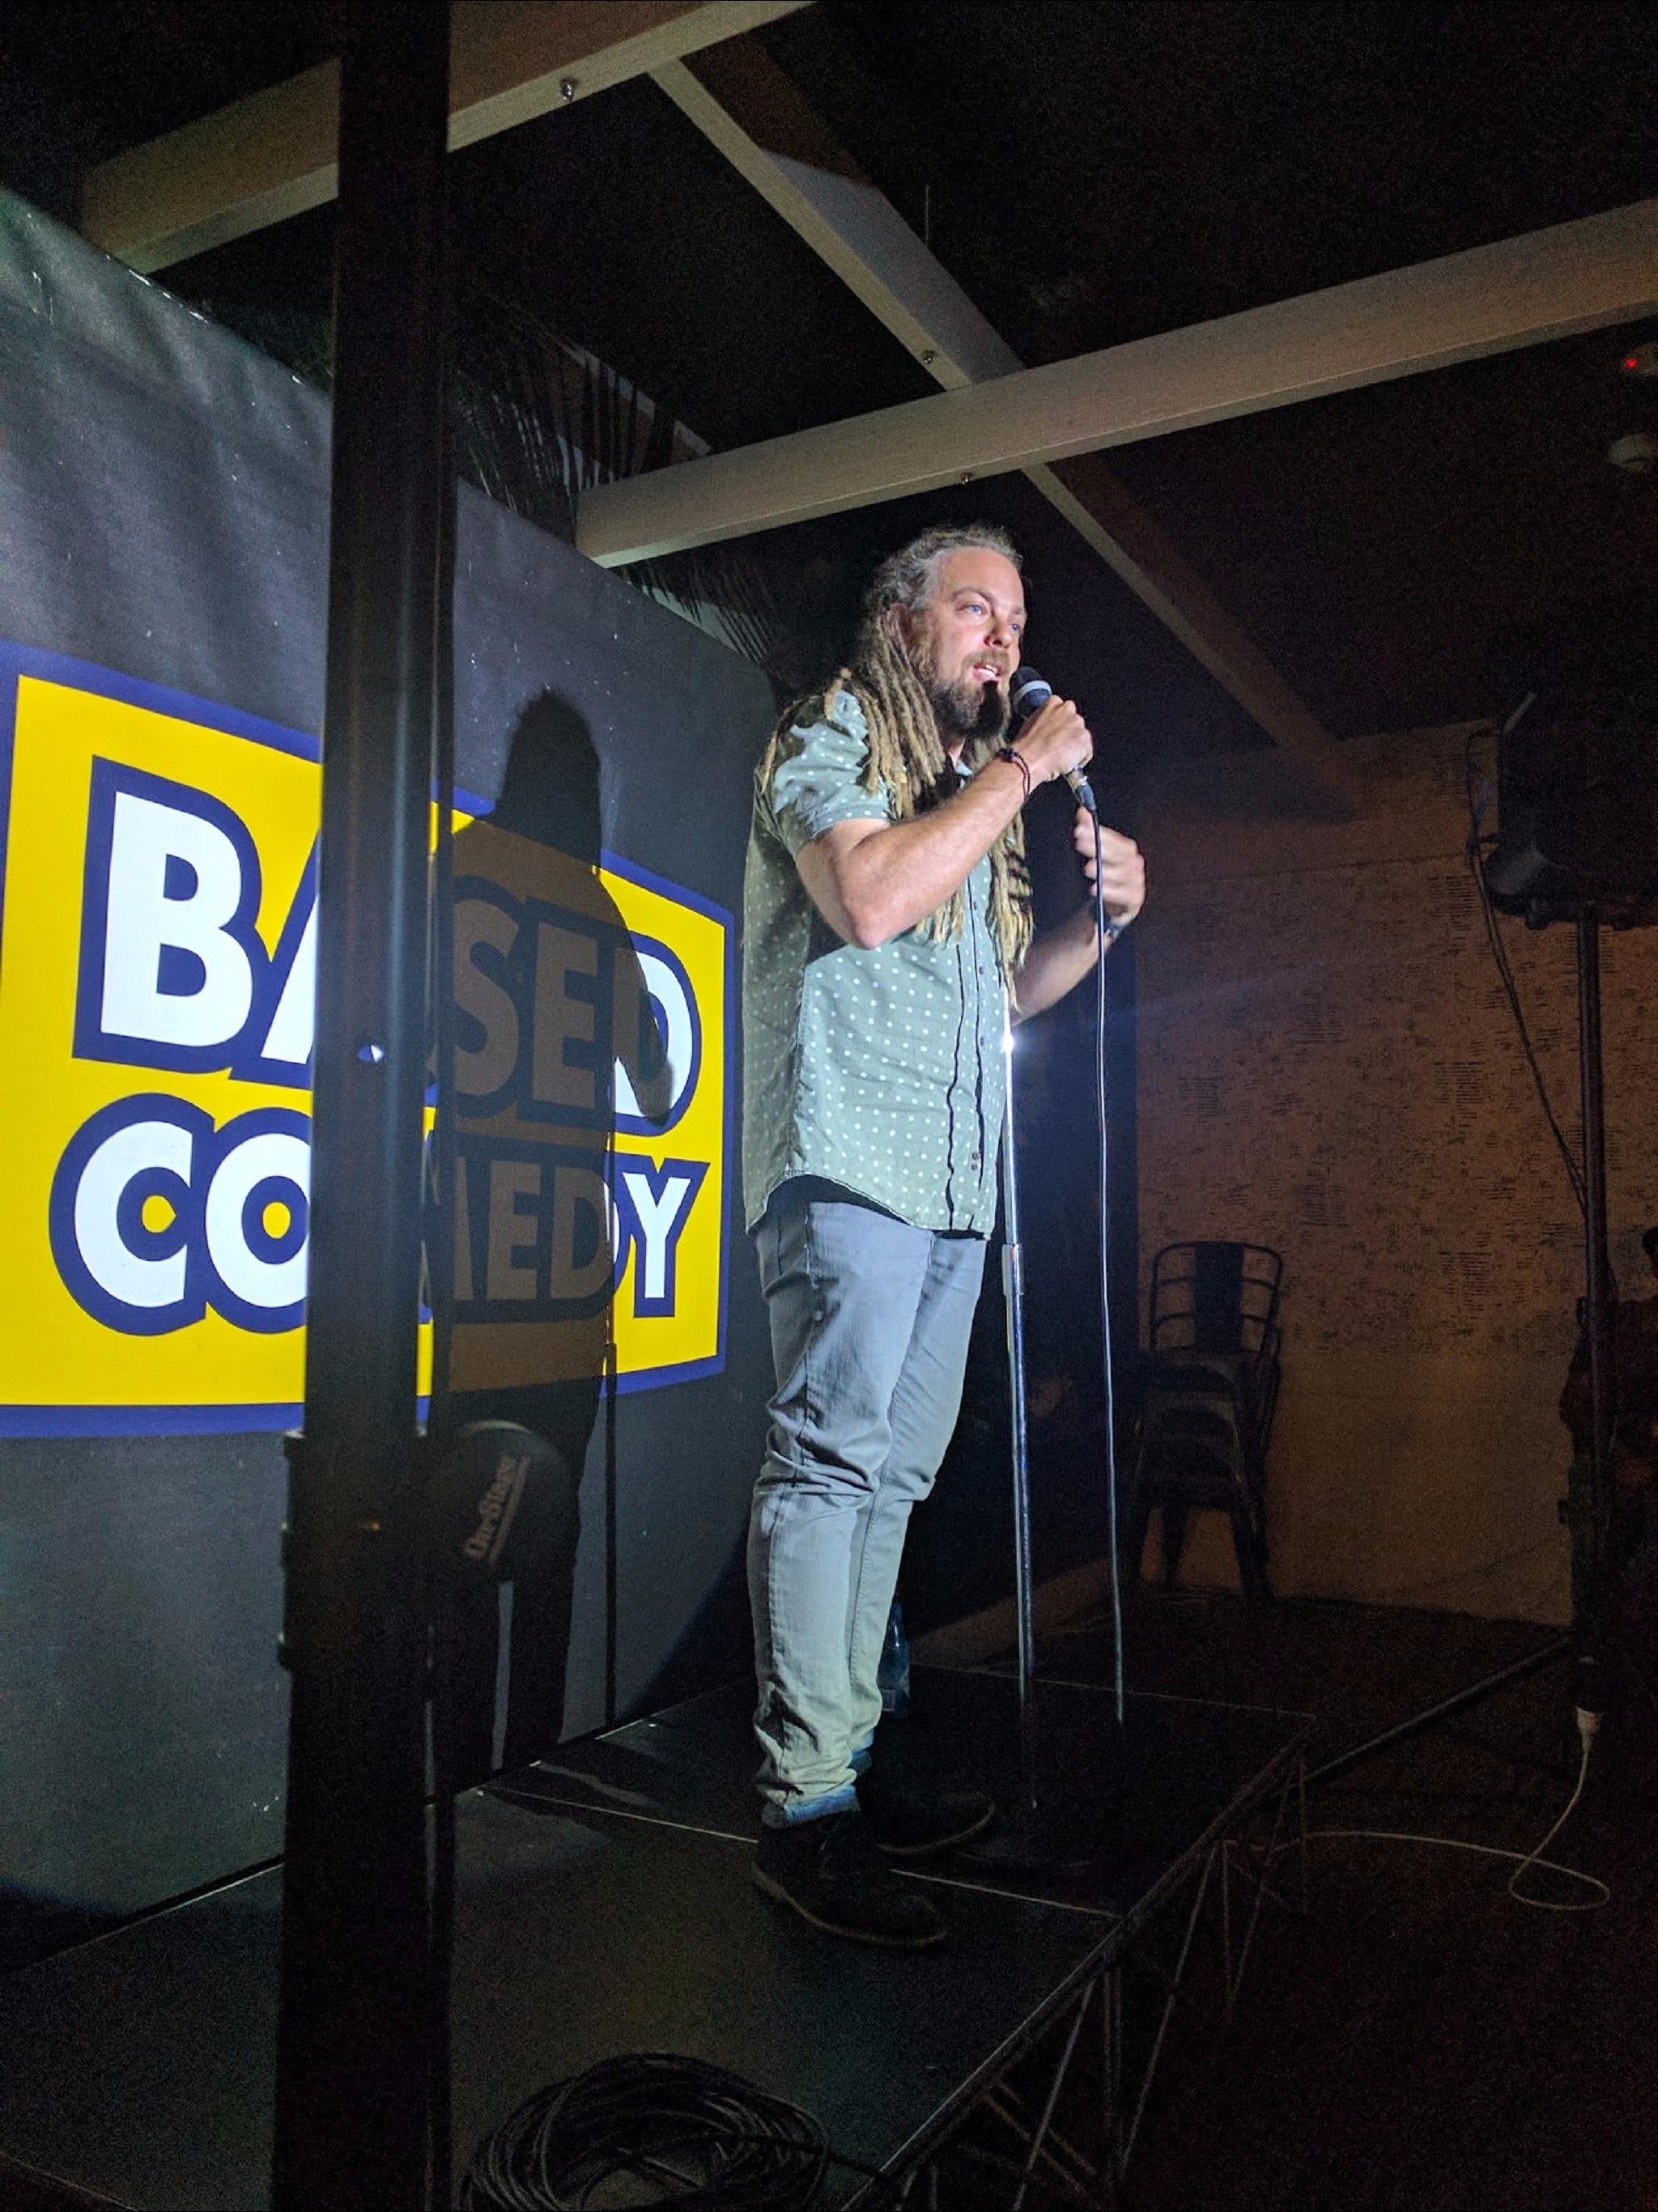 Based Comedy at The Palm Beach Hotel - Grafton Accommodation